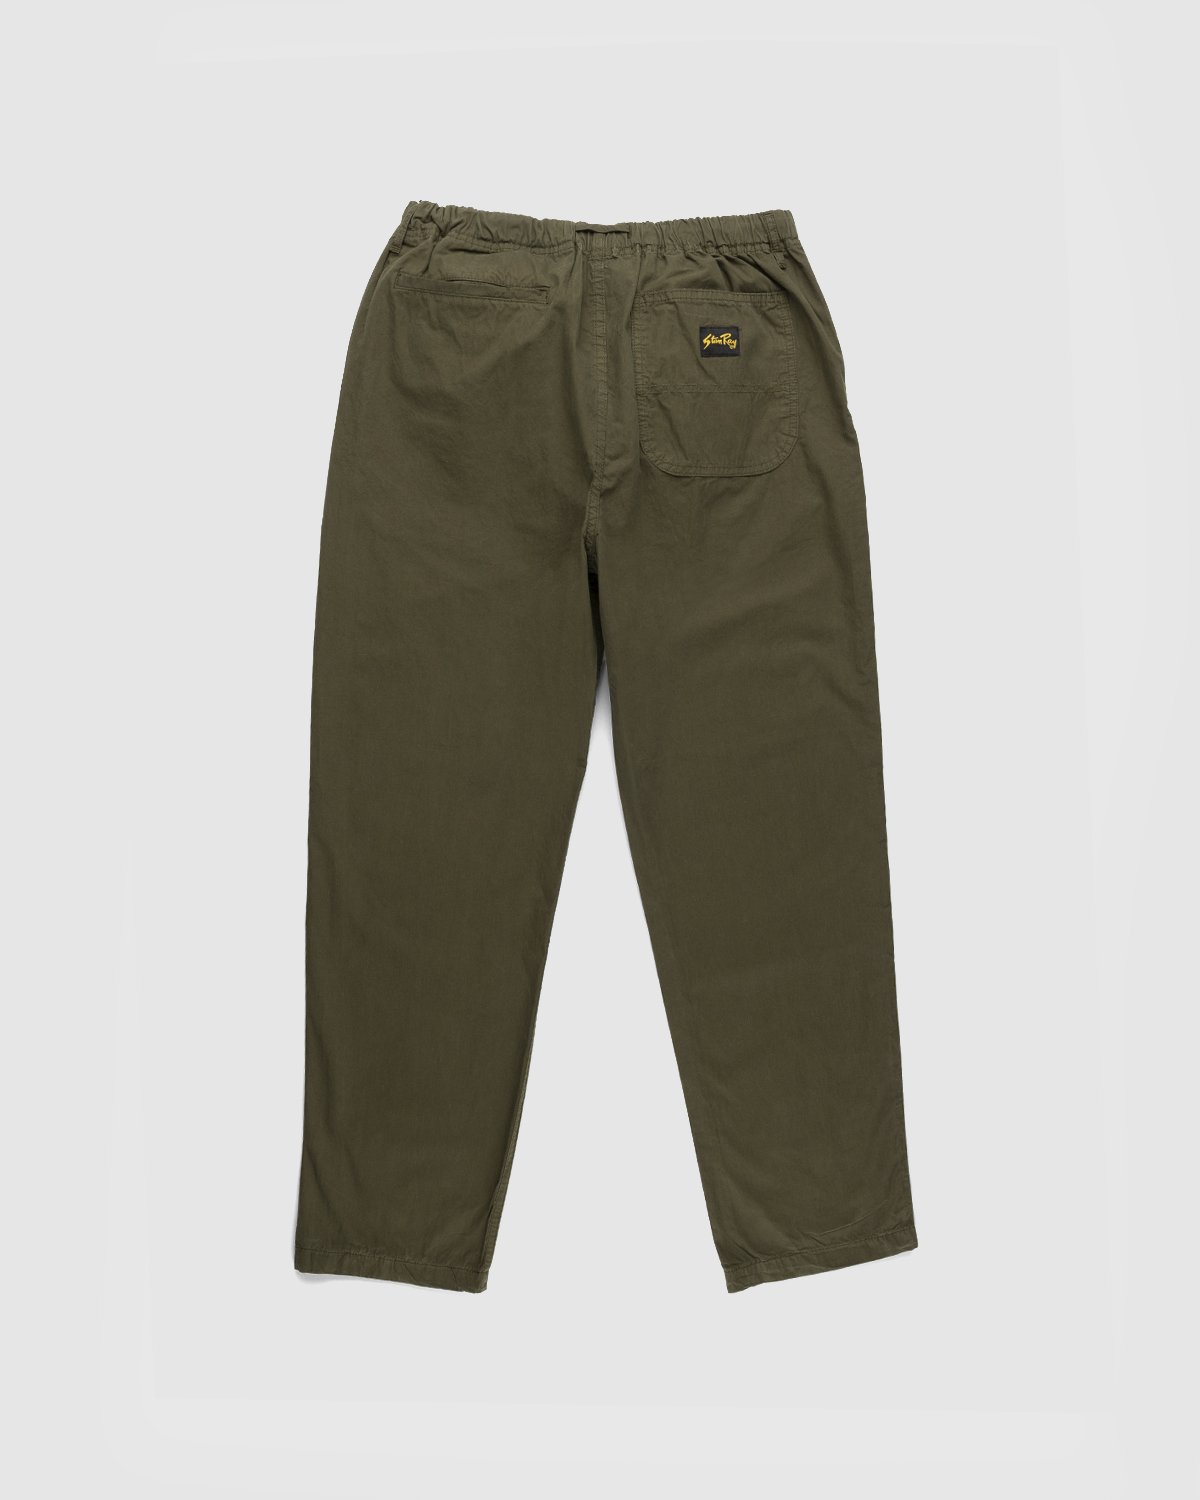 Stan Ray - Rec Pant Olive Poplin - Clothing - Green - Image 2